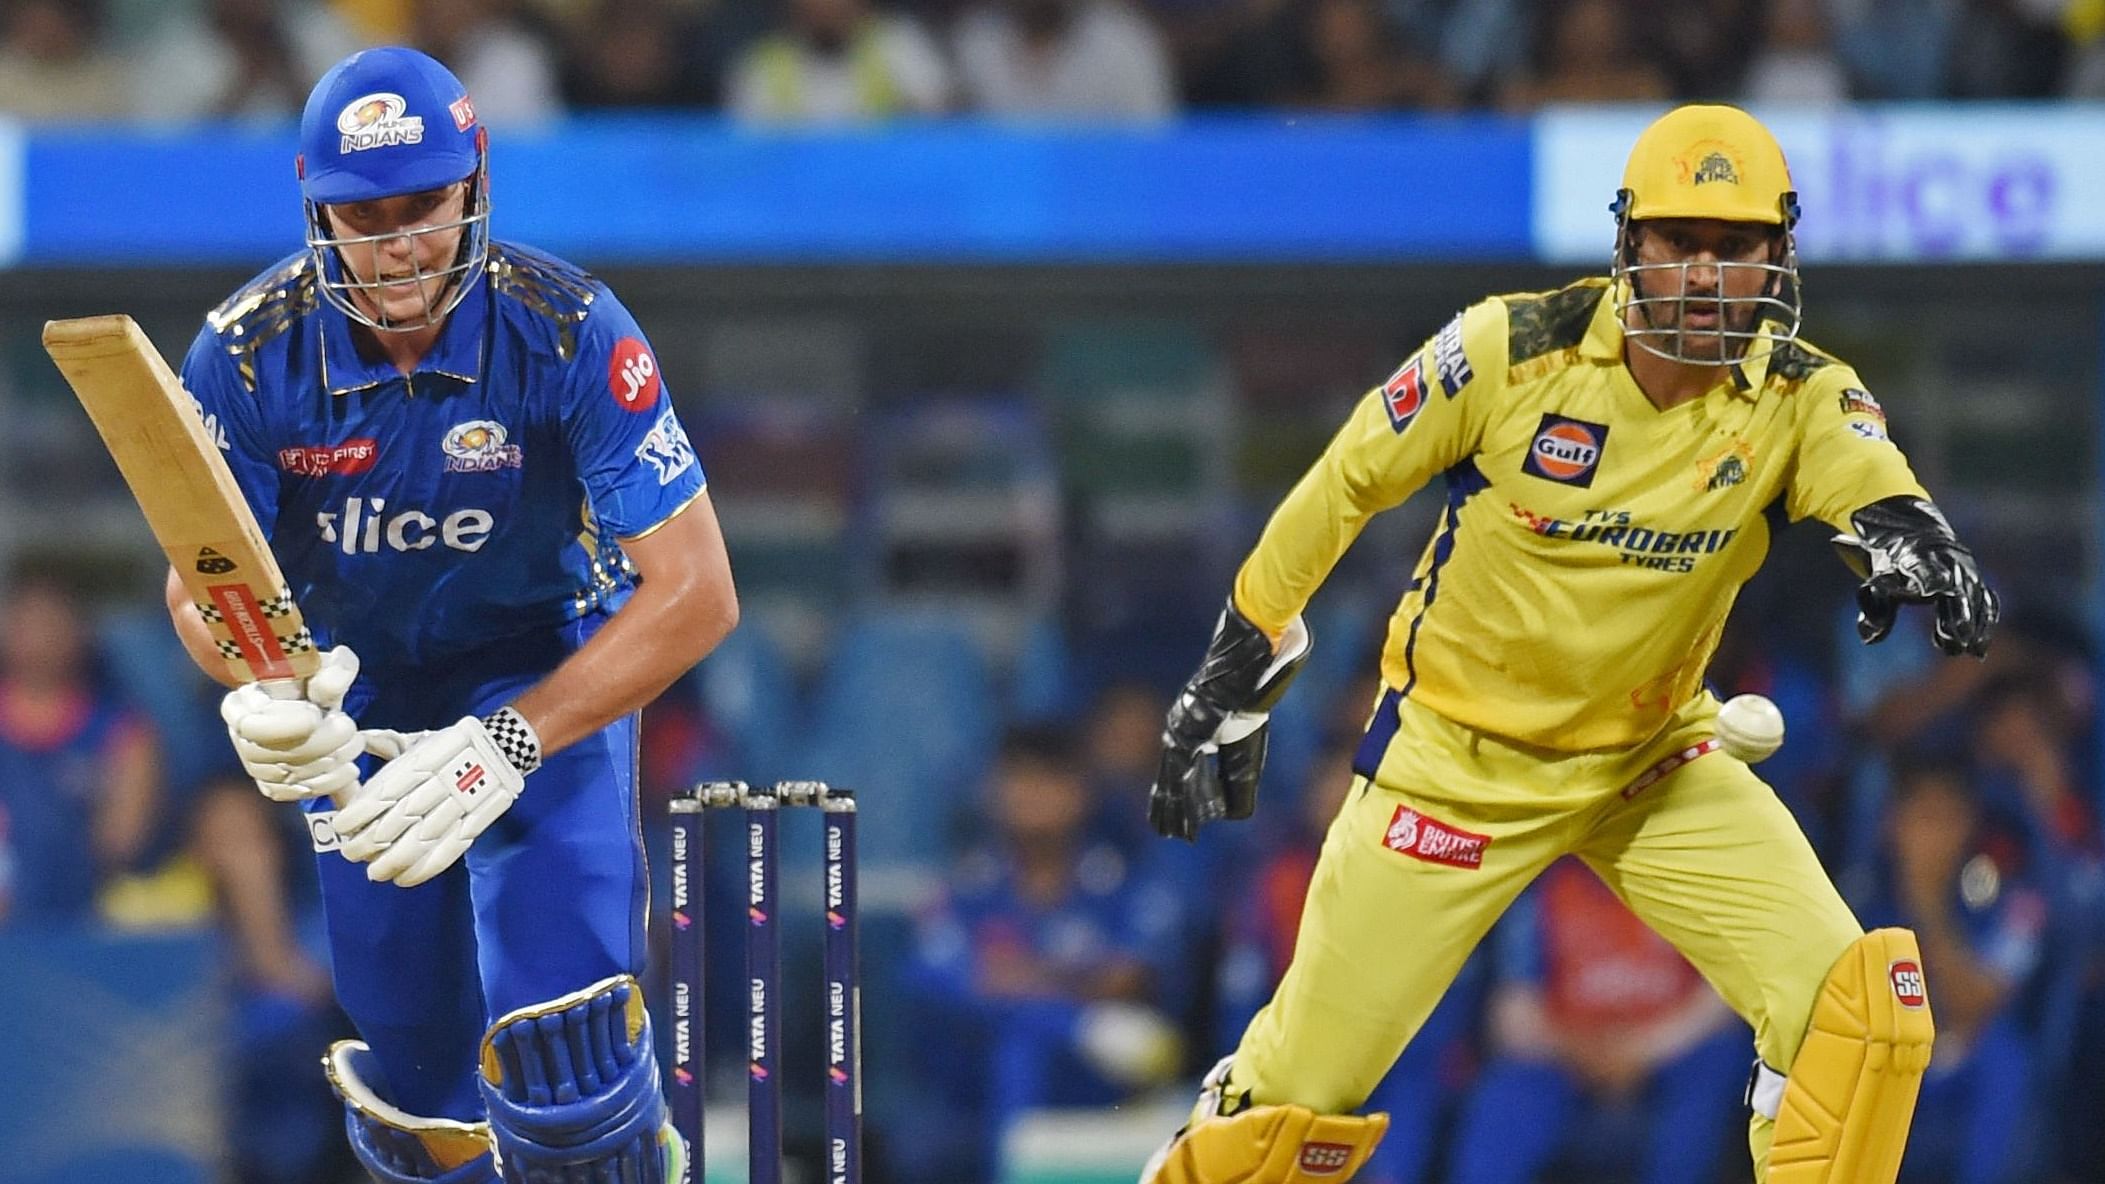 In accordance with the IPL’s latest playing conditions, each IPL game should end in 200 minutes, meaning the teams have 180 minutes to bowl 240 balls - 1.33 balls a minute - including 20 minutes of stoppage time wherein 10 minutes (in five-minute splits) are for Strategic Time-Outs and another ten minutes are offered between innings. Credit: AFP Photo